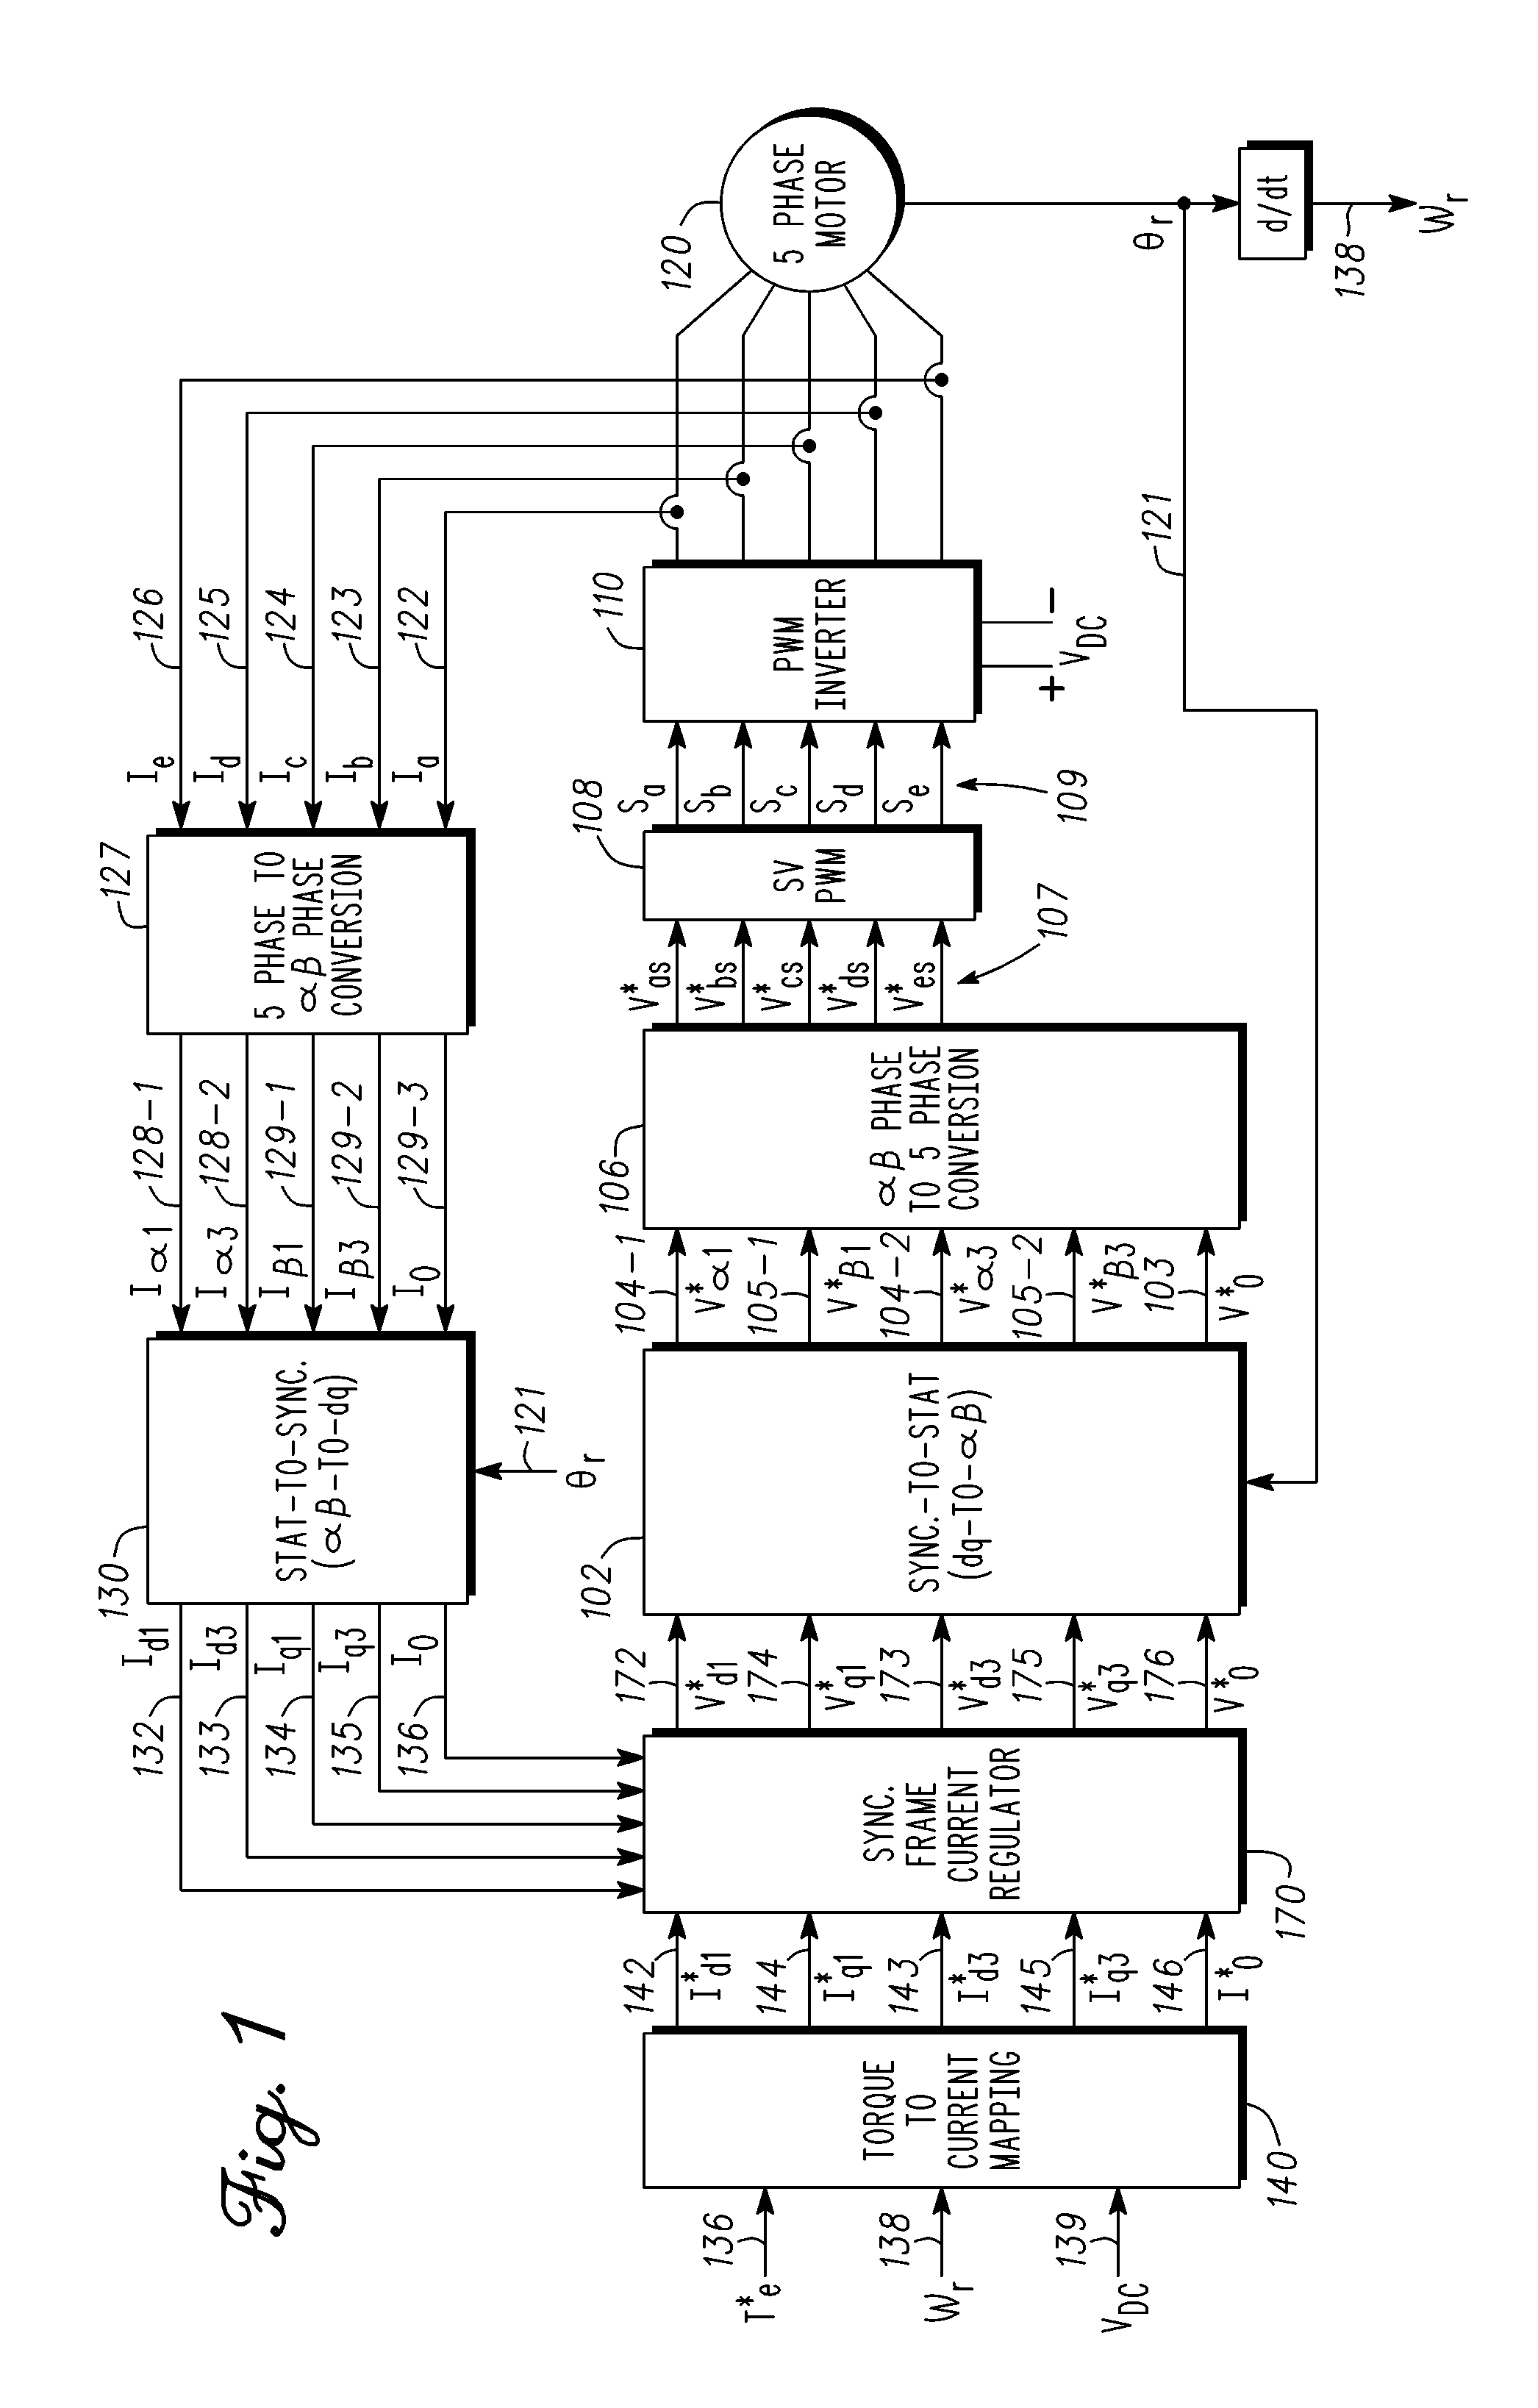 Methods, systems and apparatus for optimization of third harmonic current injection in a multi-phase machine